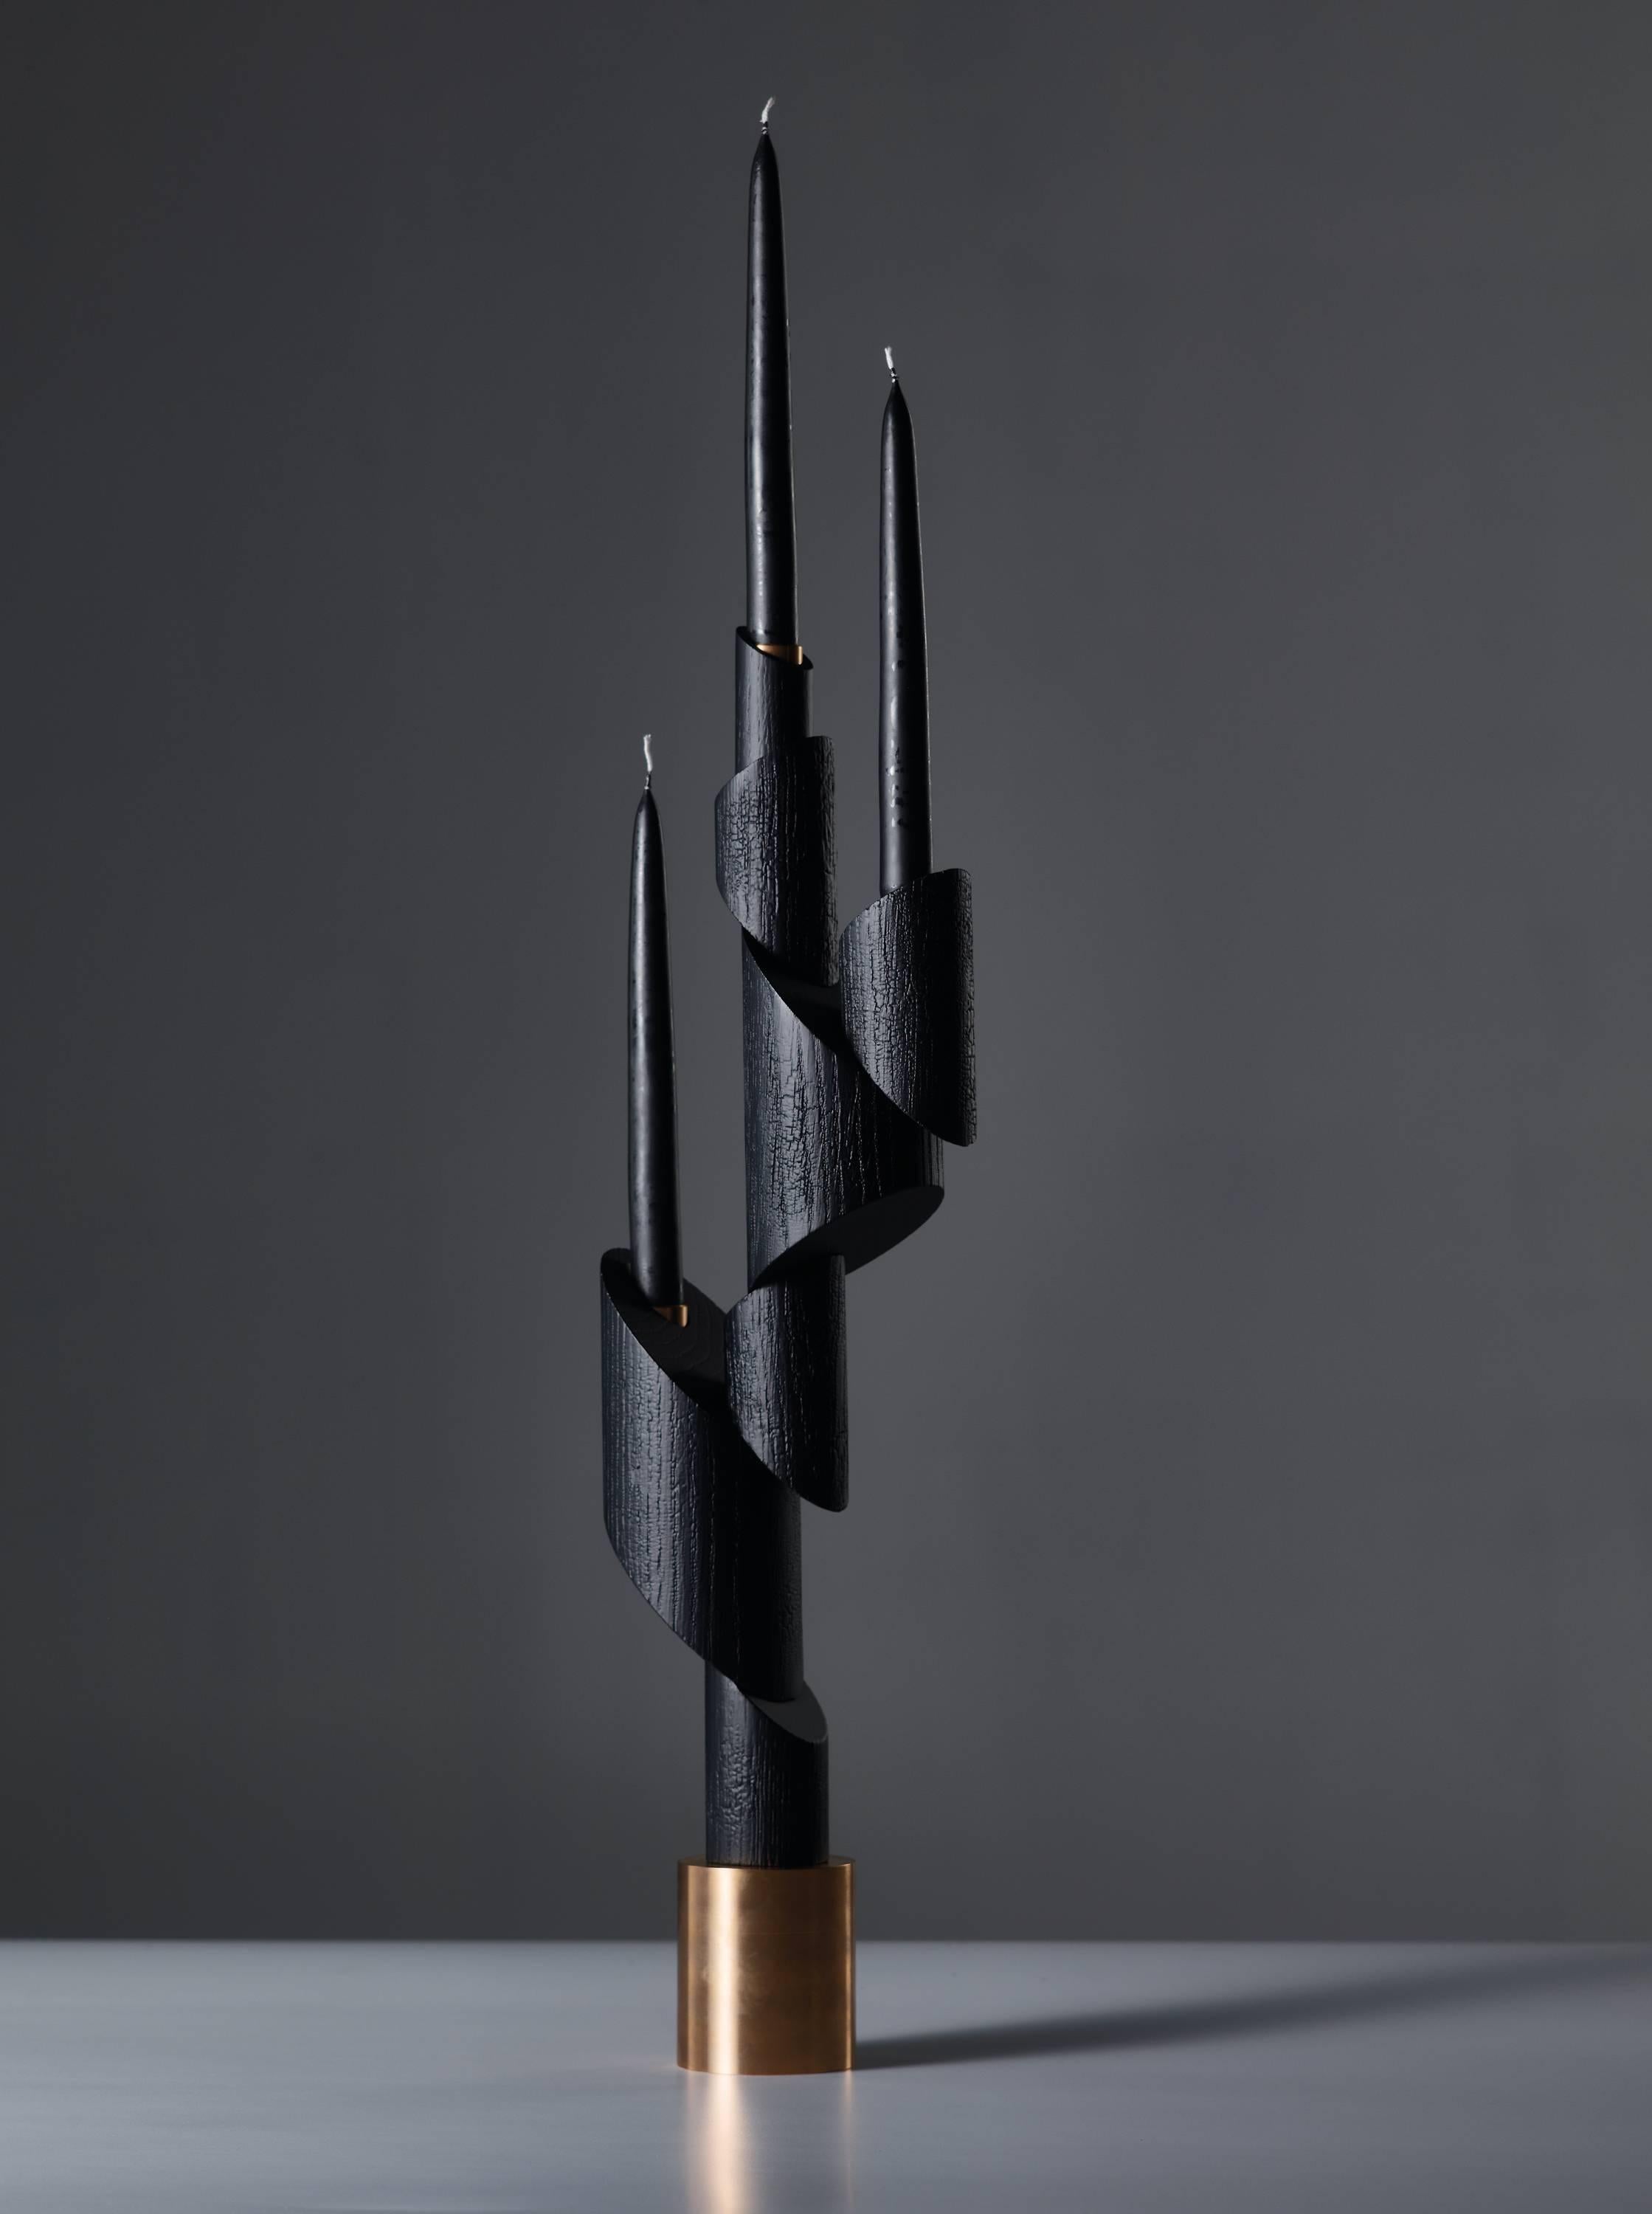 Trio of bronze chandeliers 'Ashes to Ashes' - Signed William Guillon
Signed William Guillon
Limited edition of 99
Signed and numbered
Solid burnt oak / Solid bronze
Dimensions: 65 x 19.7 x 9 cm (Height with candle: 88 cm) 
Heights of the two